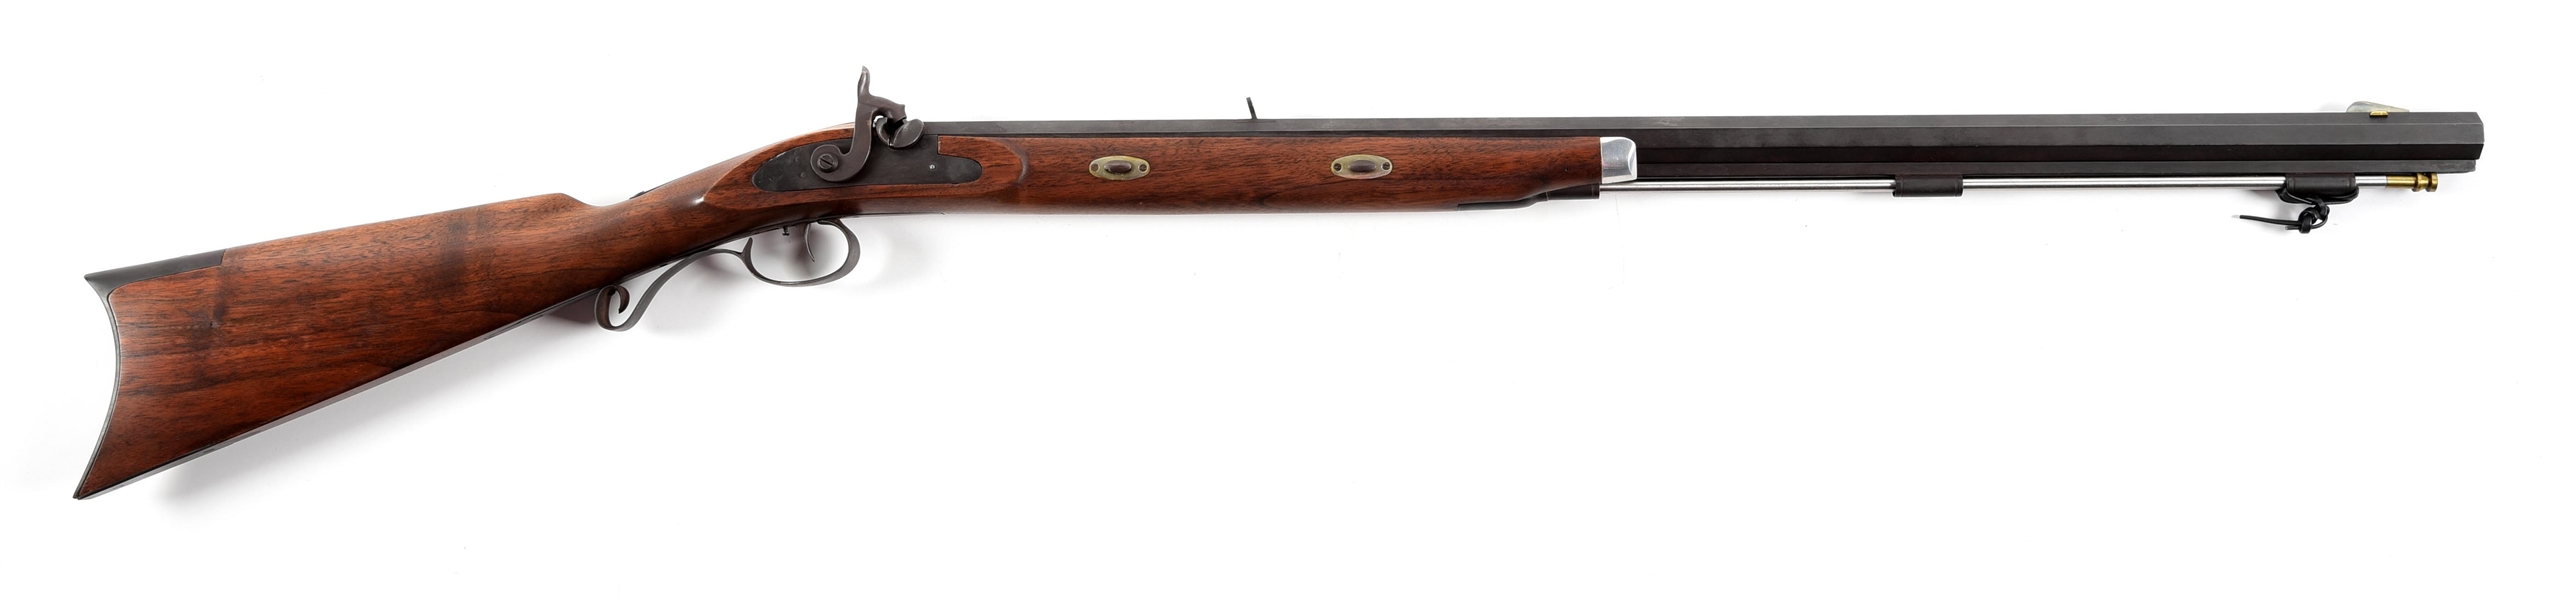 (A) ITHACA PERCUSSION MUZZLELOADER